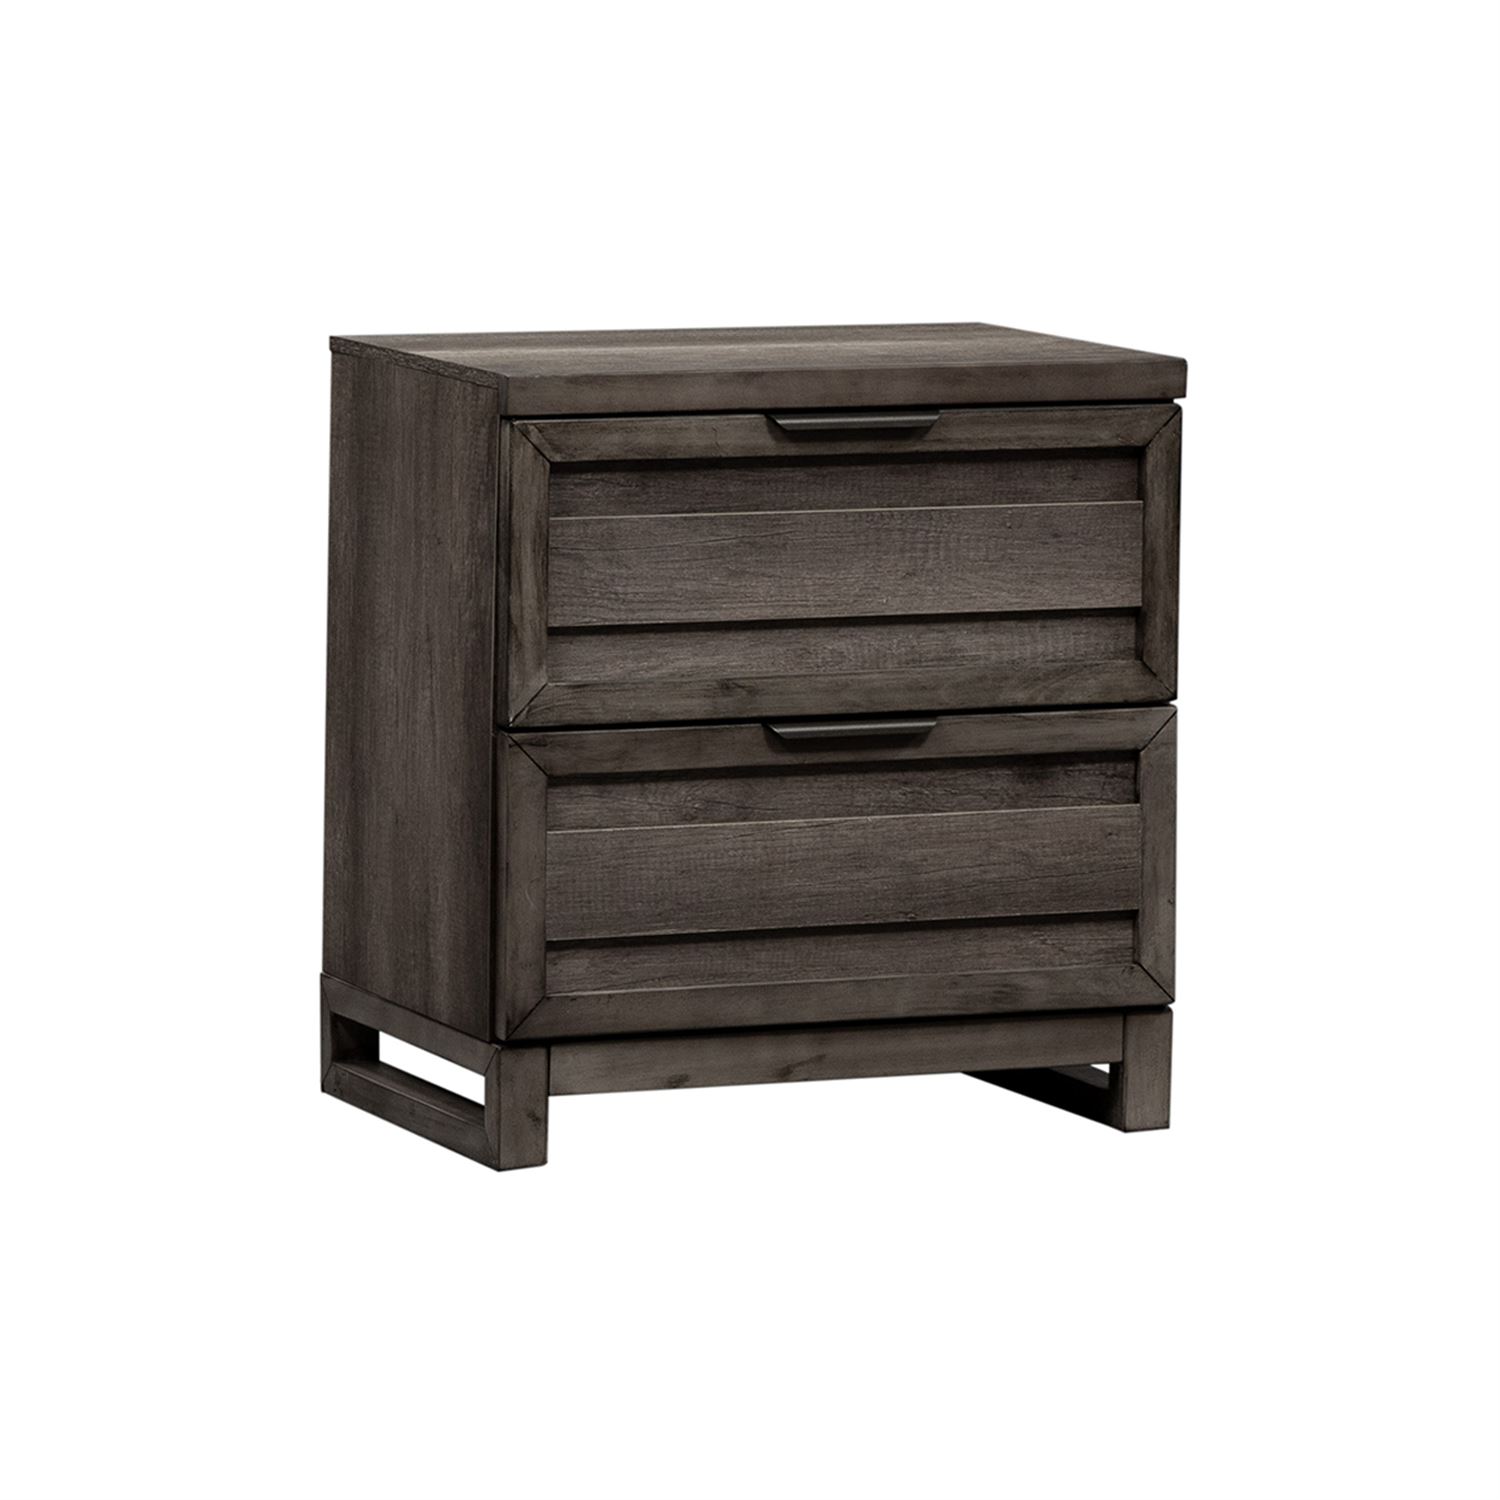 Tanners Creek Night Stand